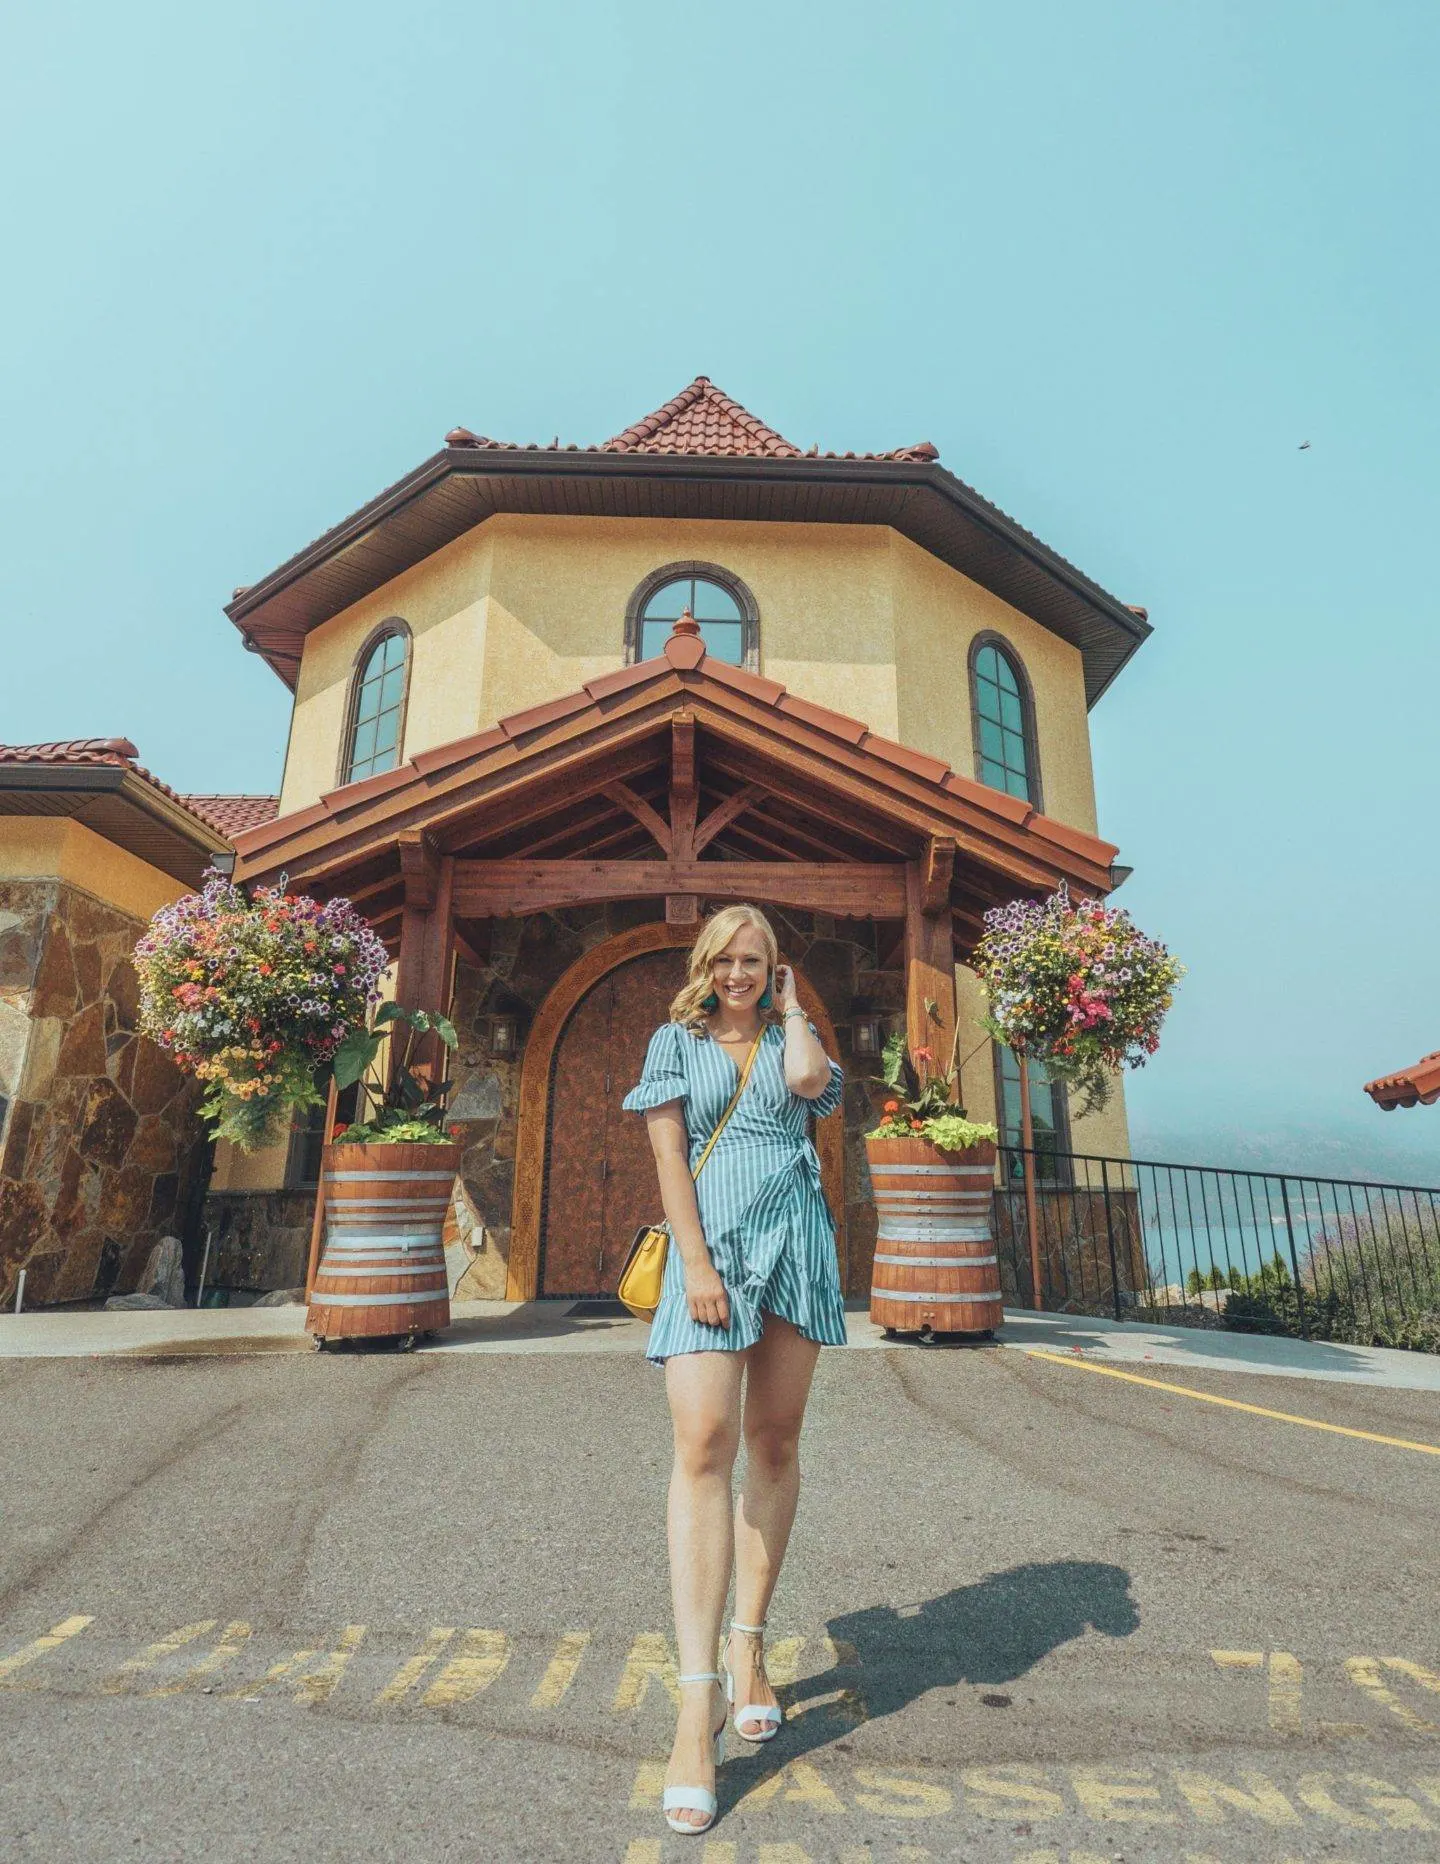 Gray Monk Estate Winery (featured here) is a family favourite winery in Lake Country. Click for the rest of the list of our favourite wineries of Lake Country!